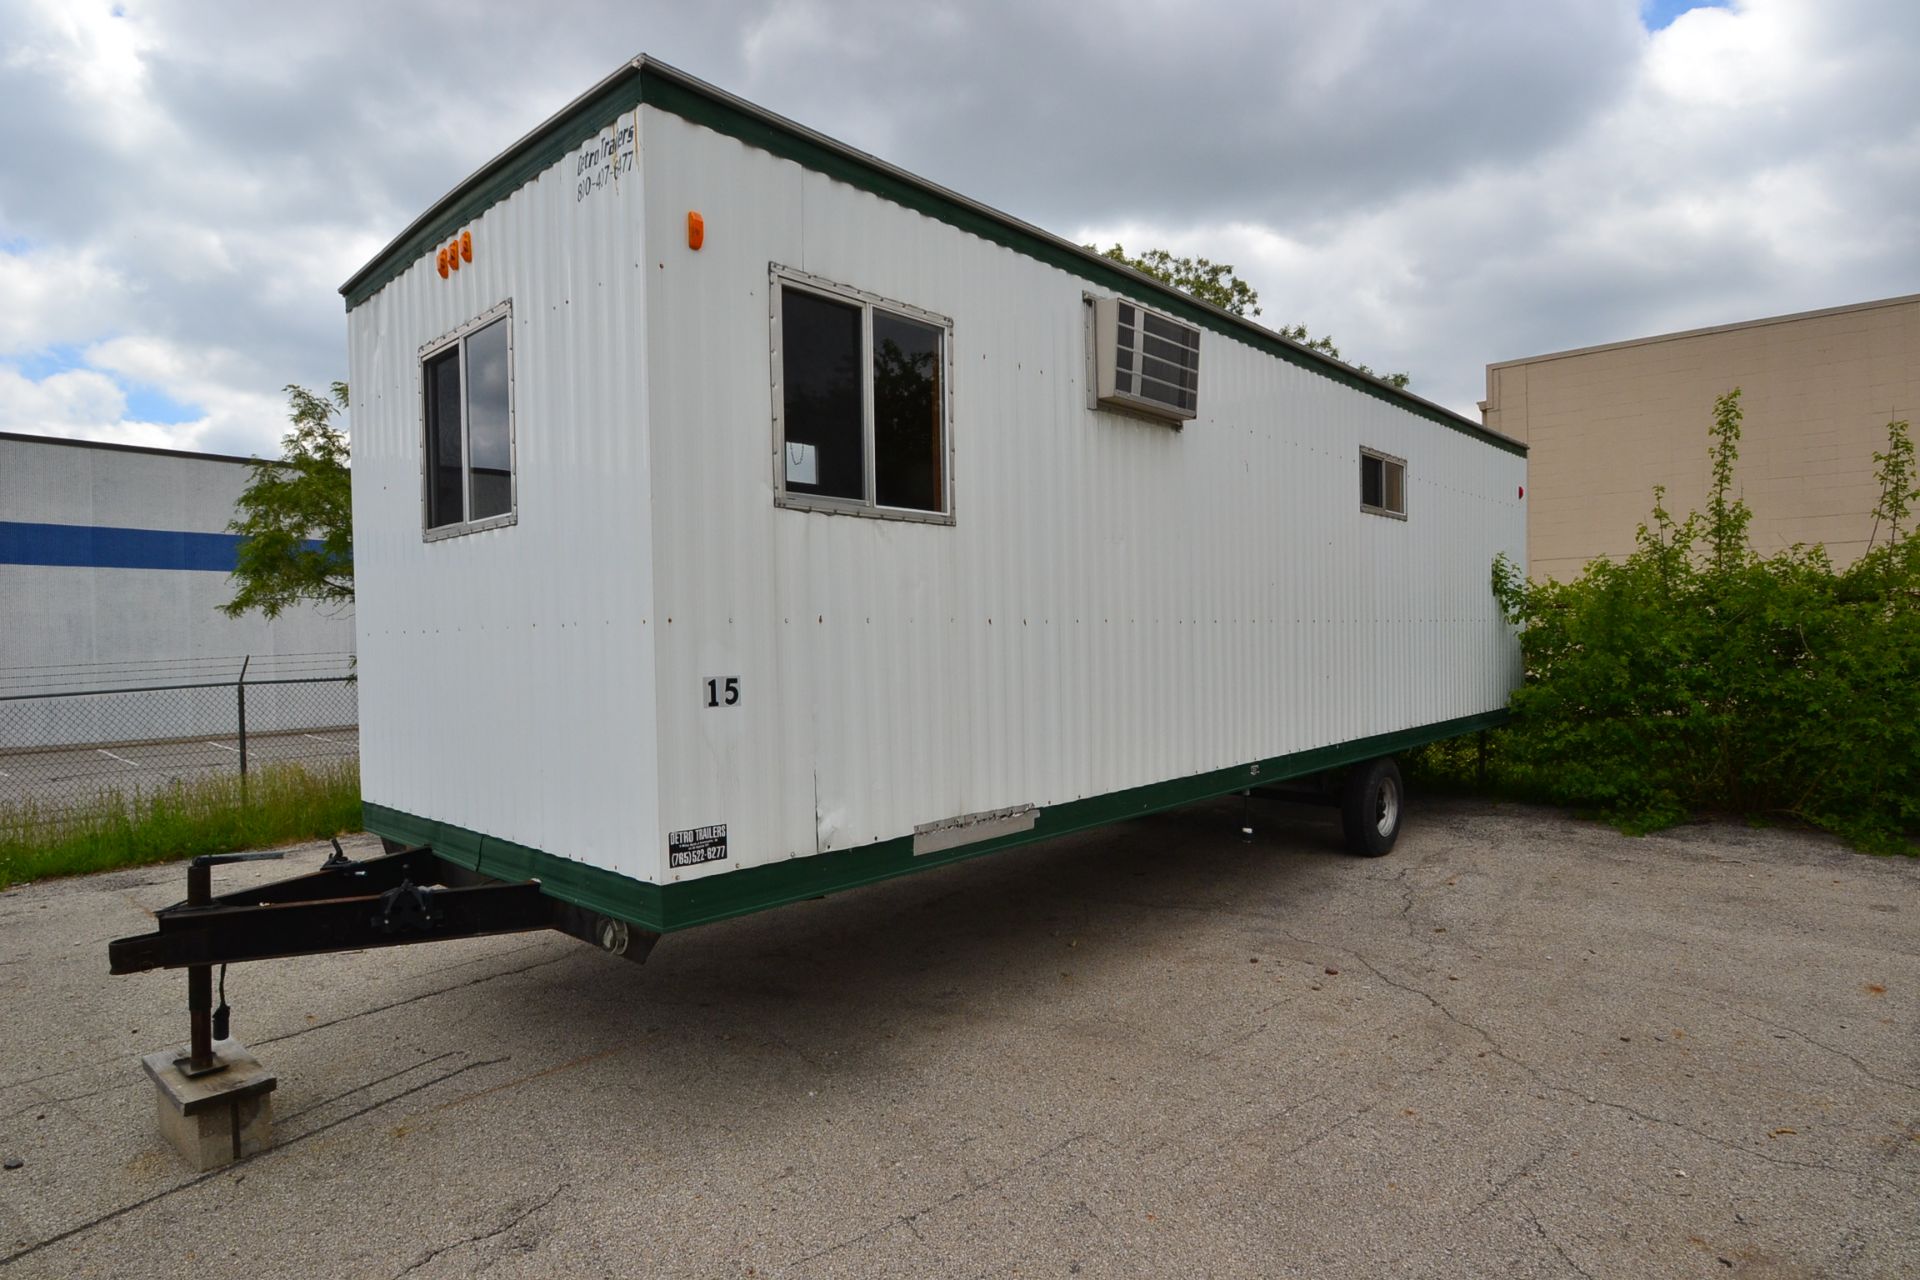 OFFICE TRAILER, MARK LINE, VIN# 36127, 32', 2010, 7,000 LBS., W/ AC UNIT - Image 2 of 2